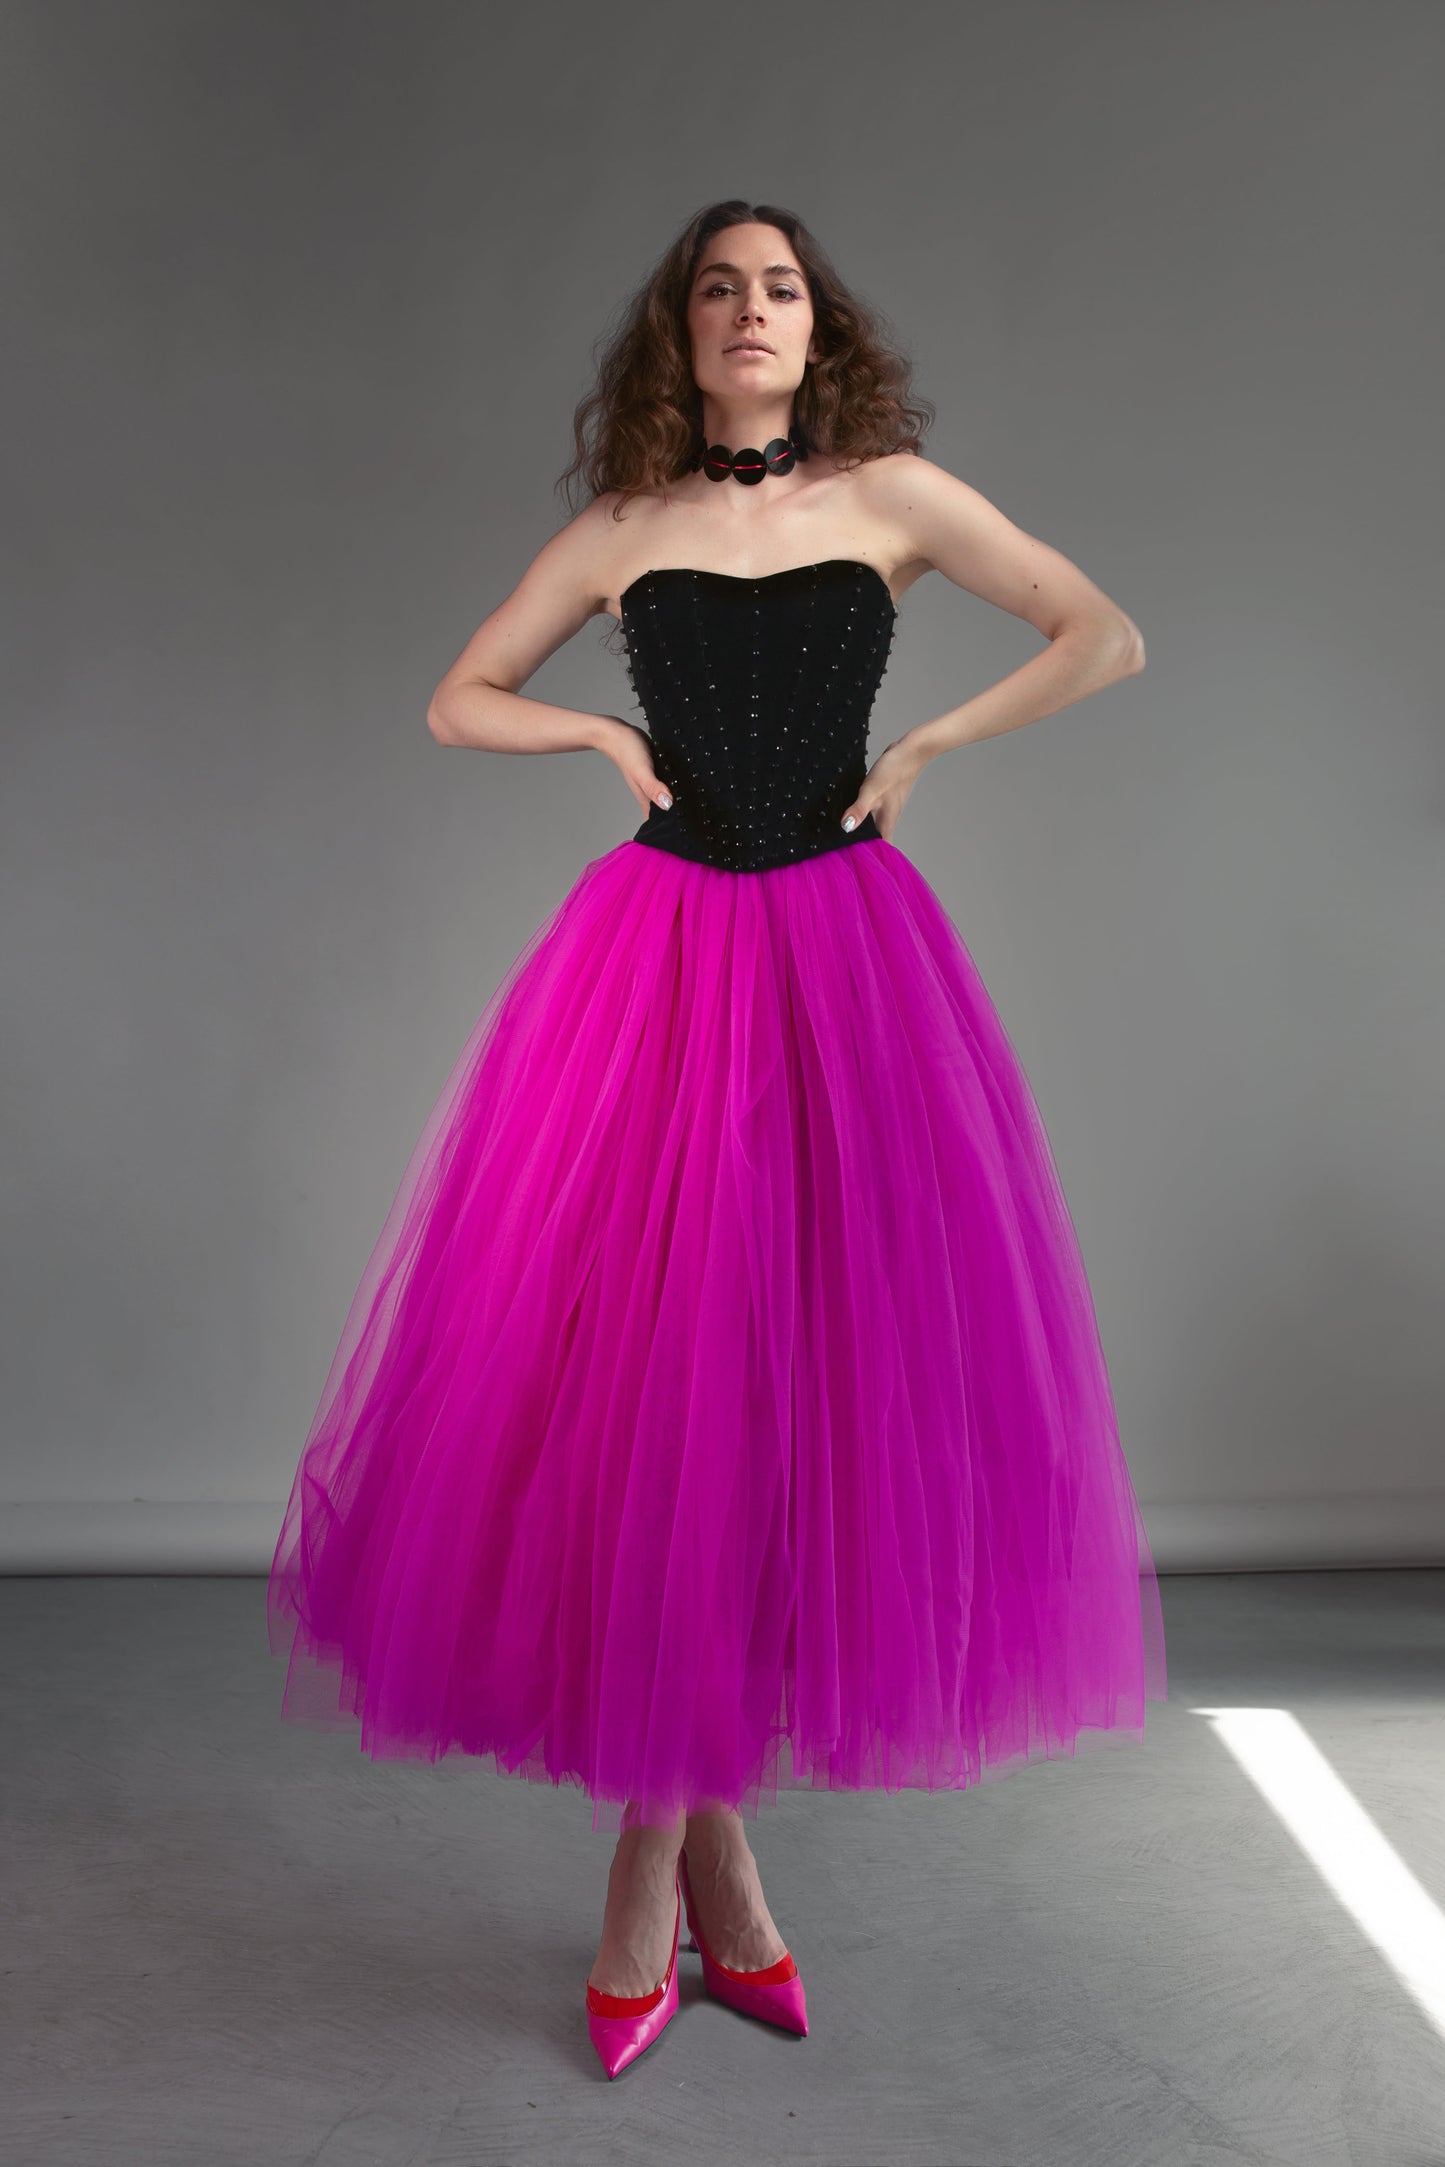 Black corset with stones and voluminous red violet tulle skirt